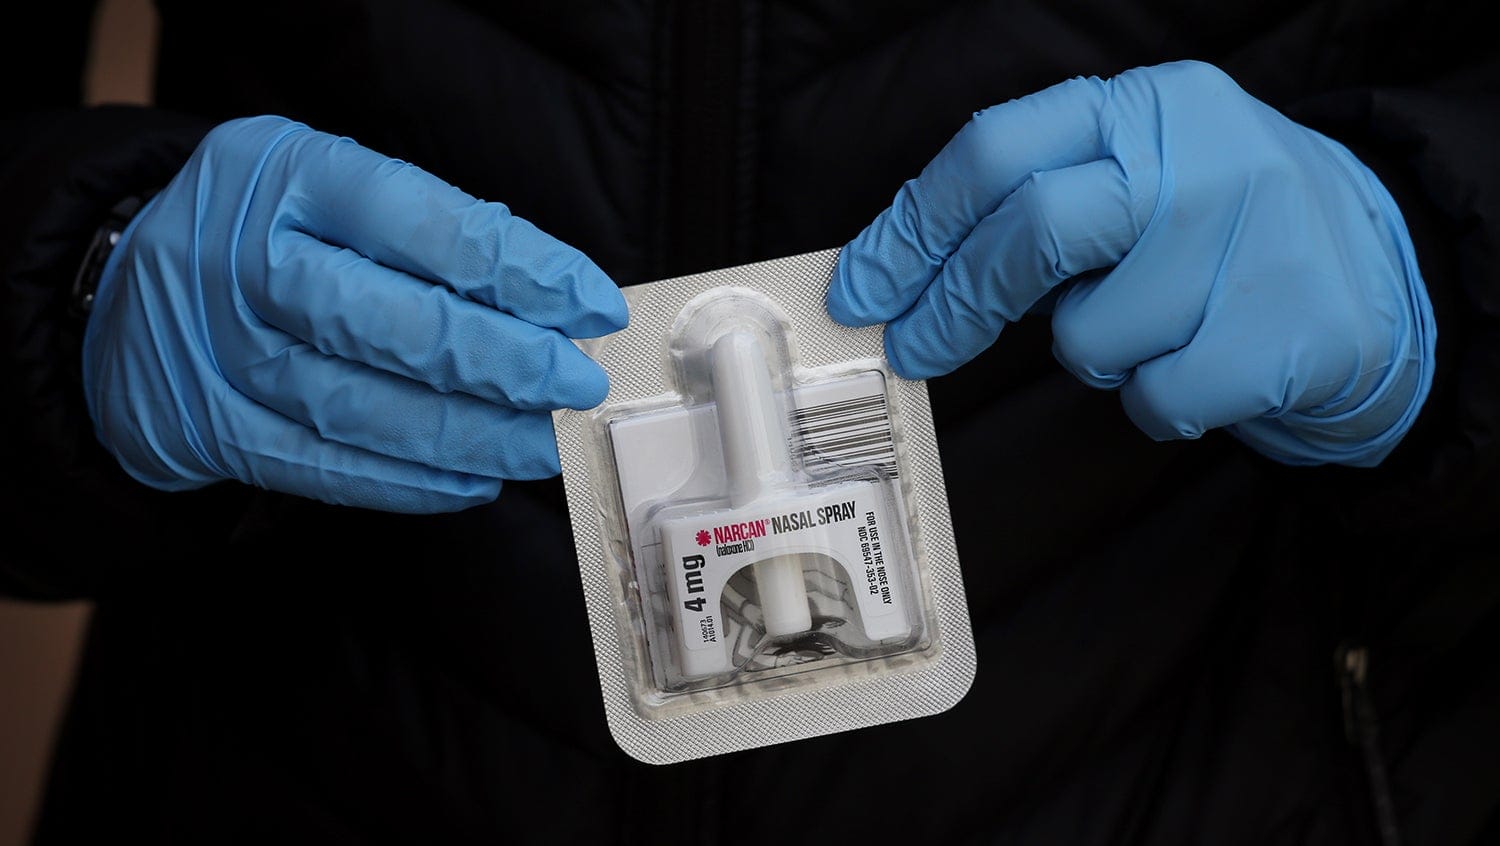 Close up of nurse's blue-gloved hands holding a dose of Narcan (naloxone)